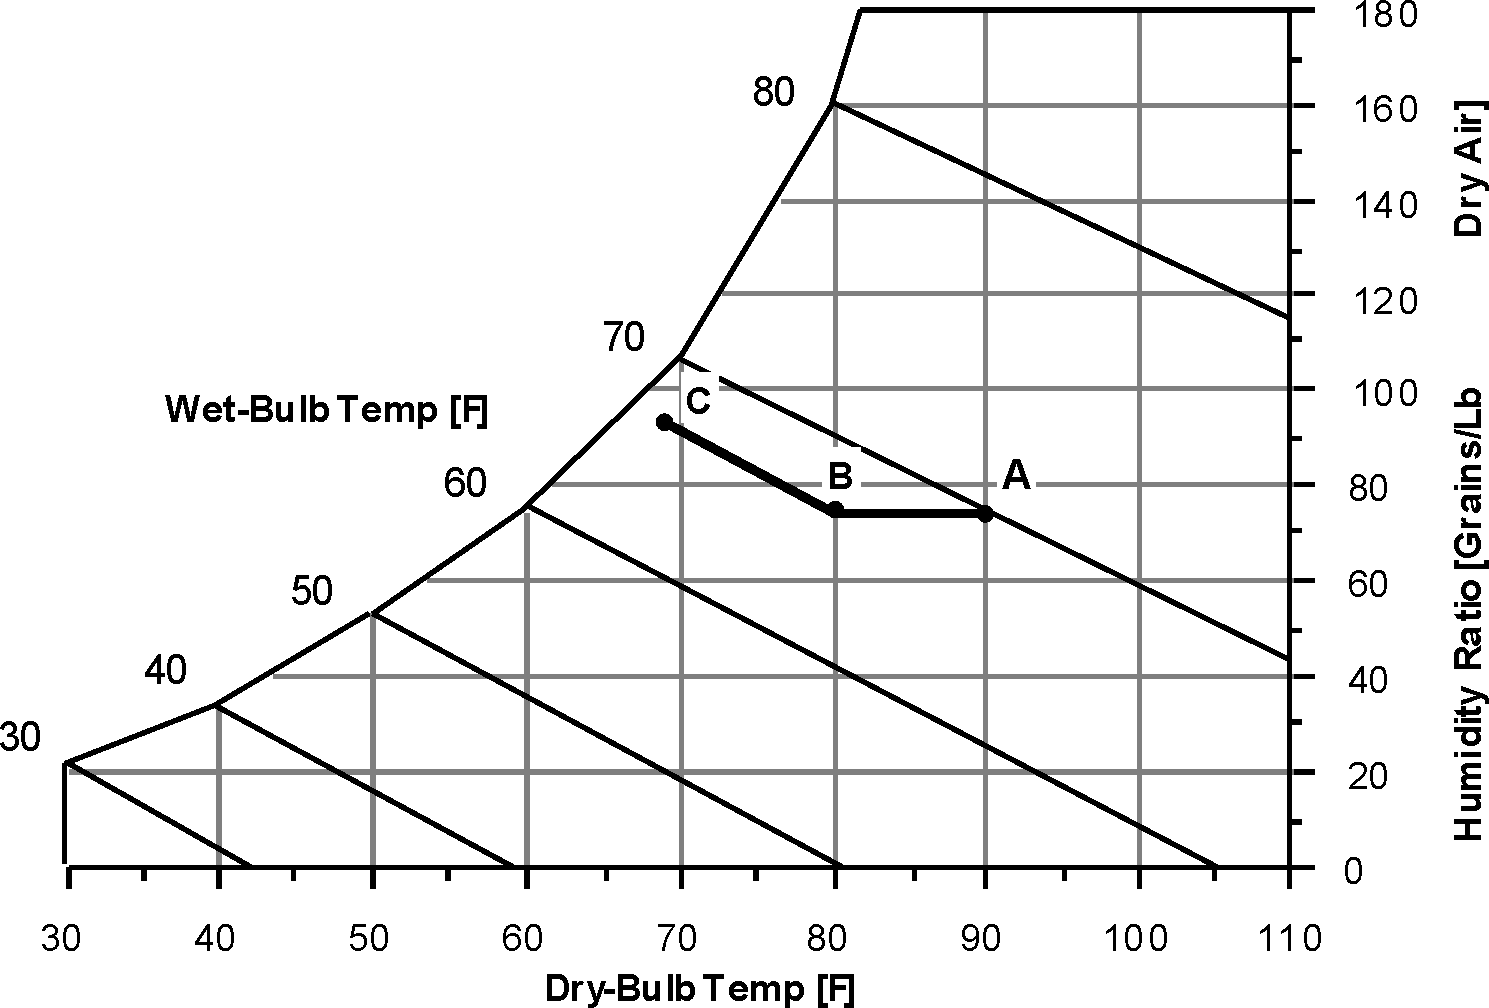 Thermodynamic Process for Supply Air Through Two Stage Evaporative Cooler